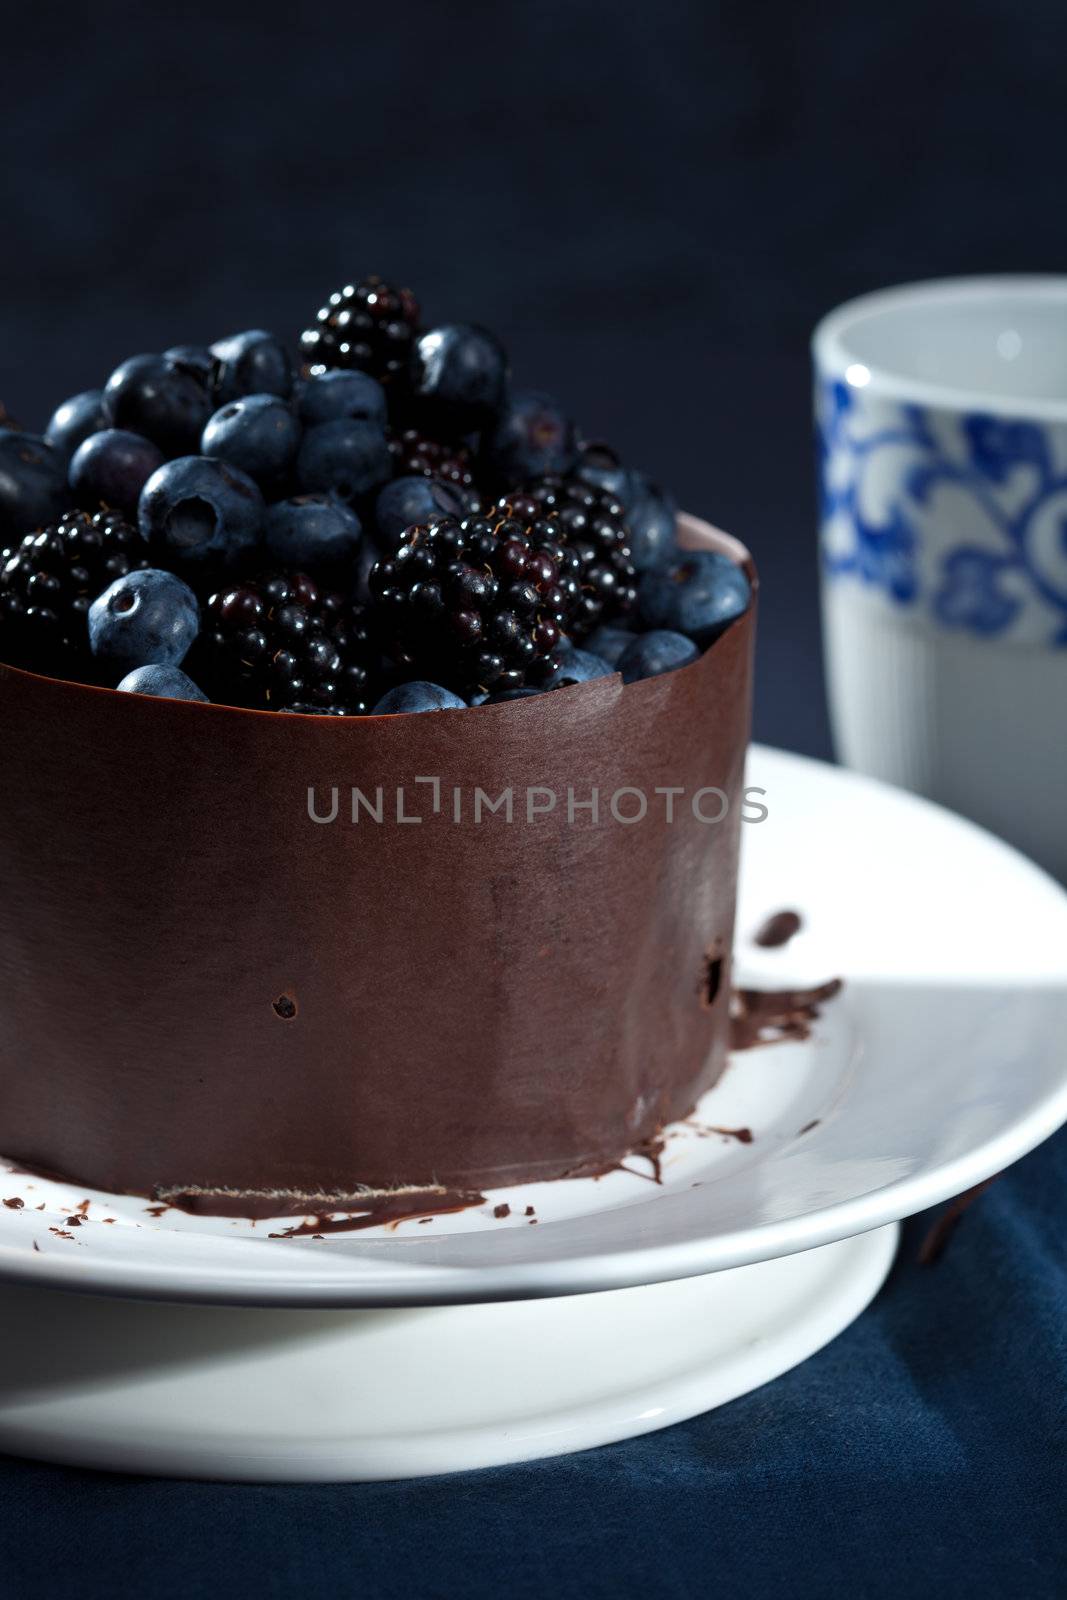 A pretty and festive chocolate cake with blueberries and blackberries.